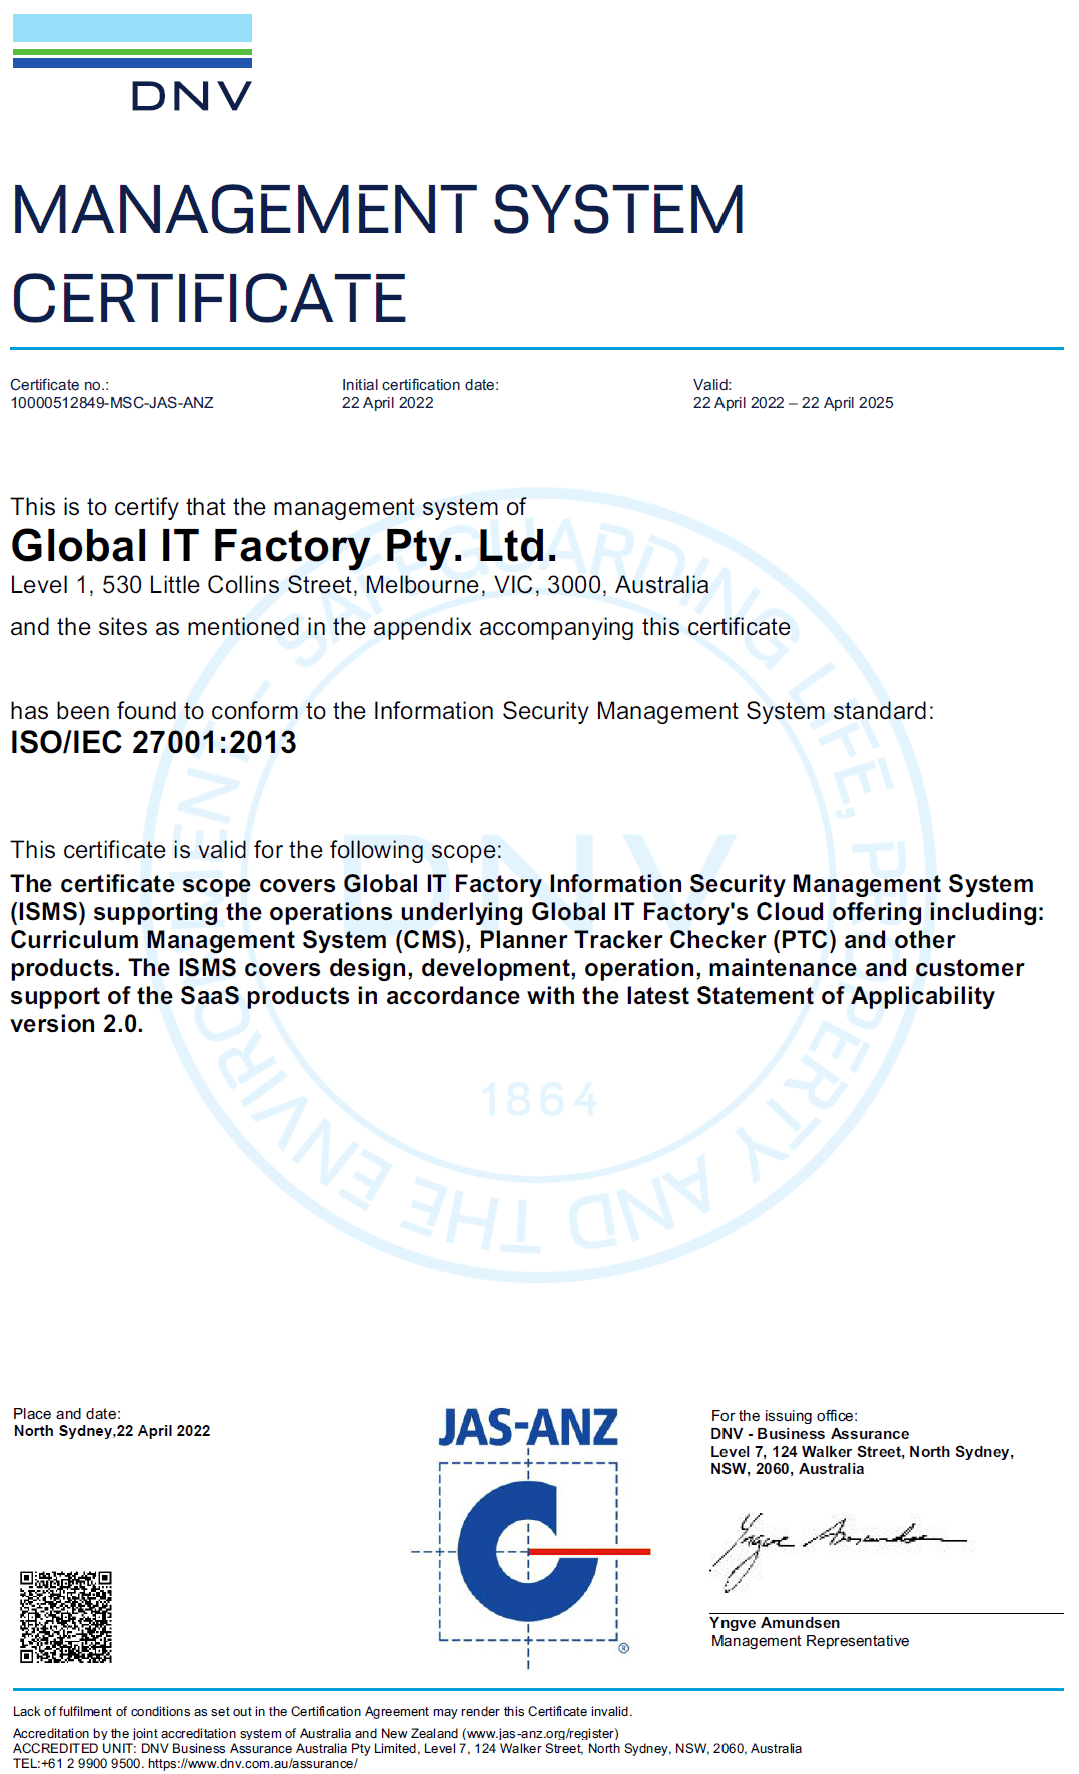 DNV Management System Certificate awarded to Global IT Factory Pty. Ltd. for ISO/IEC 27001:2013 certification. Valid from 29-Apr-2022 to 28-Apr-2025 after successfully passing the certification audit.